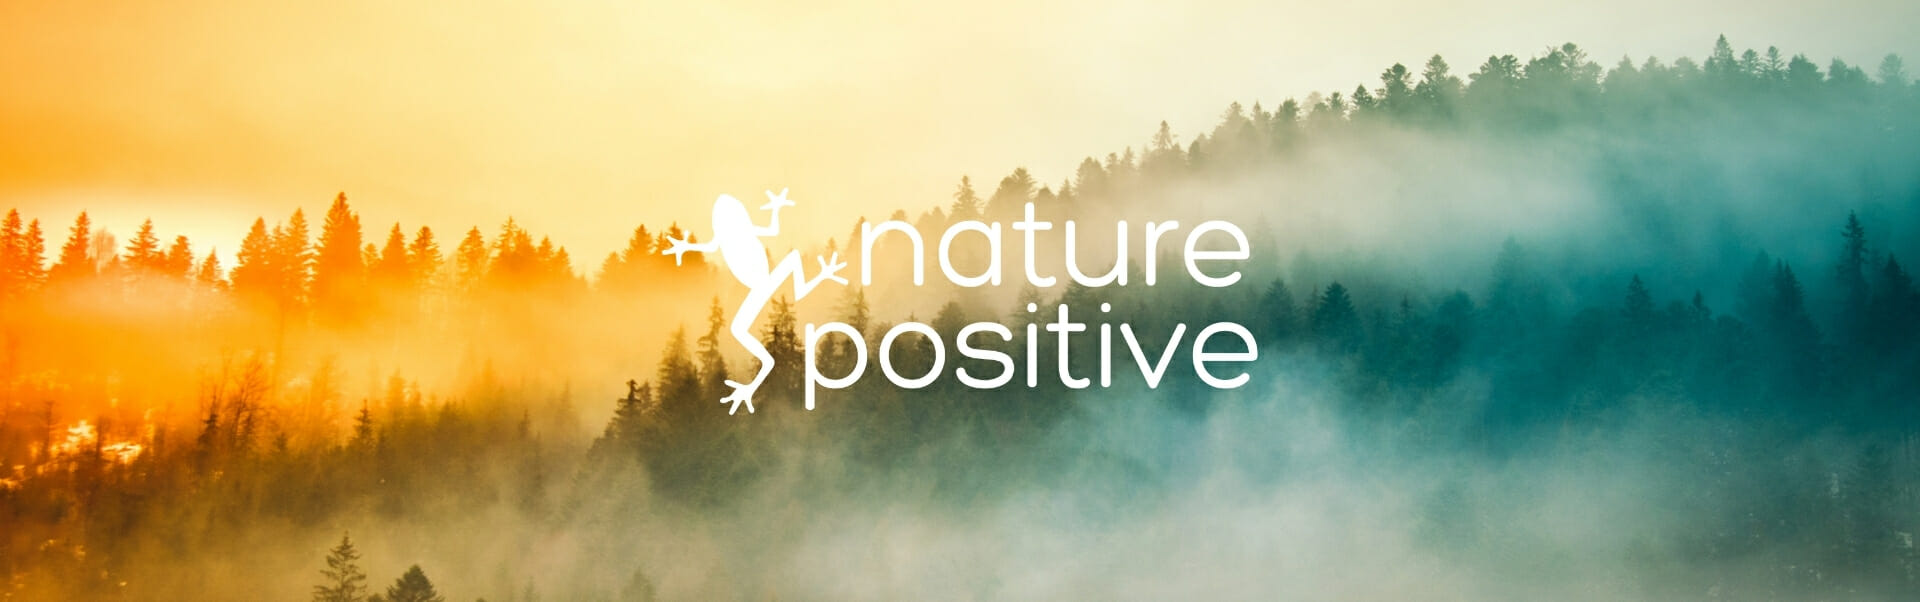 THE NEXT EVOLUTION IN BIODIVERSITY: RSK GROUP LAUNCHES NATURE POSITIVE, A MANAGEMENT CONSULTANCY TO SUPPORT SUSTAINABLE BUSINESSES @RSKGroup @naturepositive_